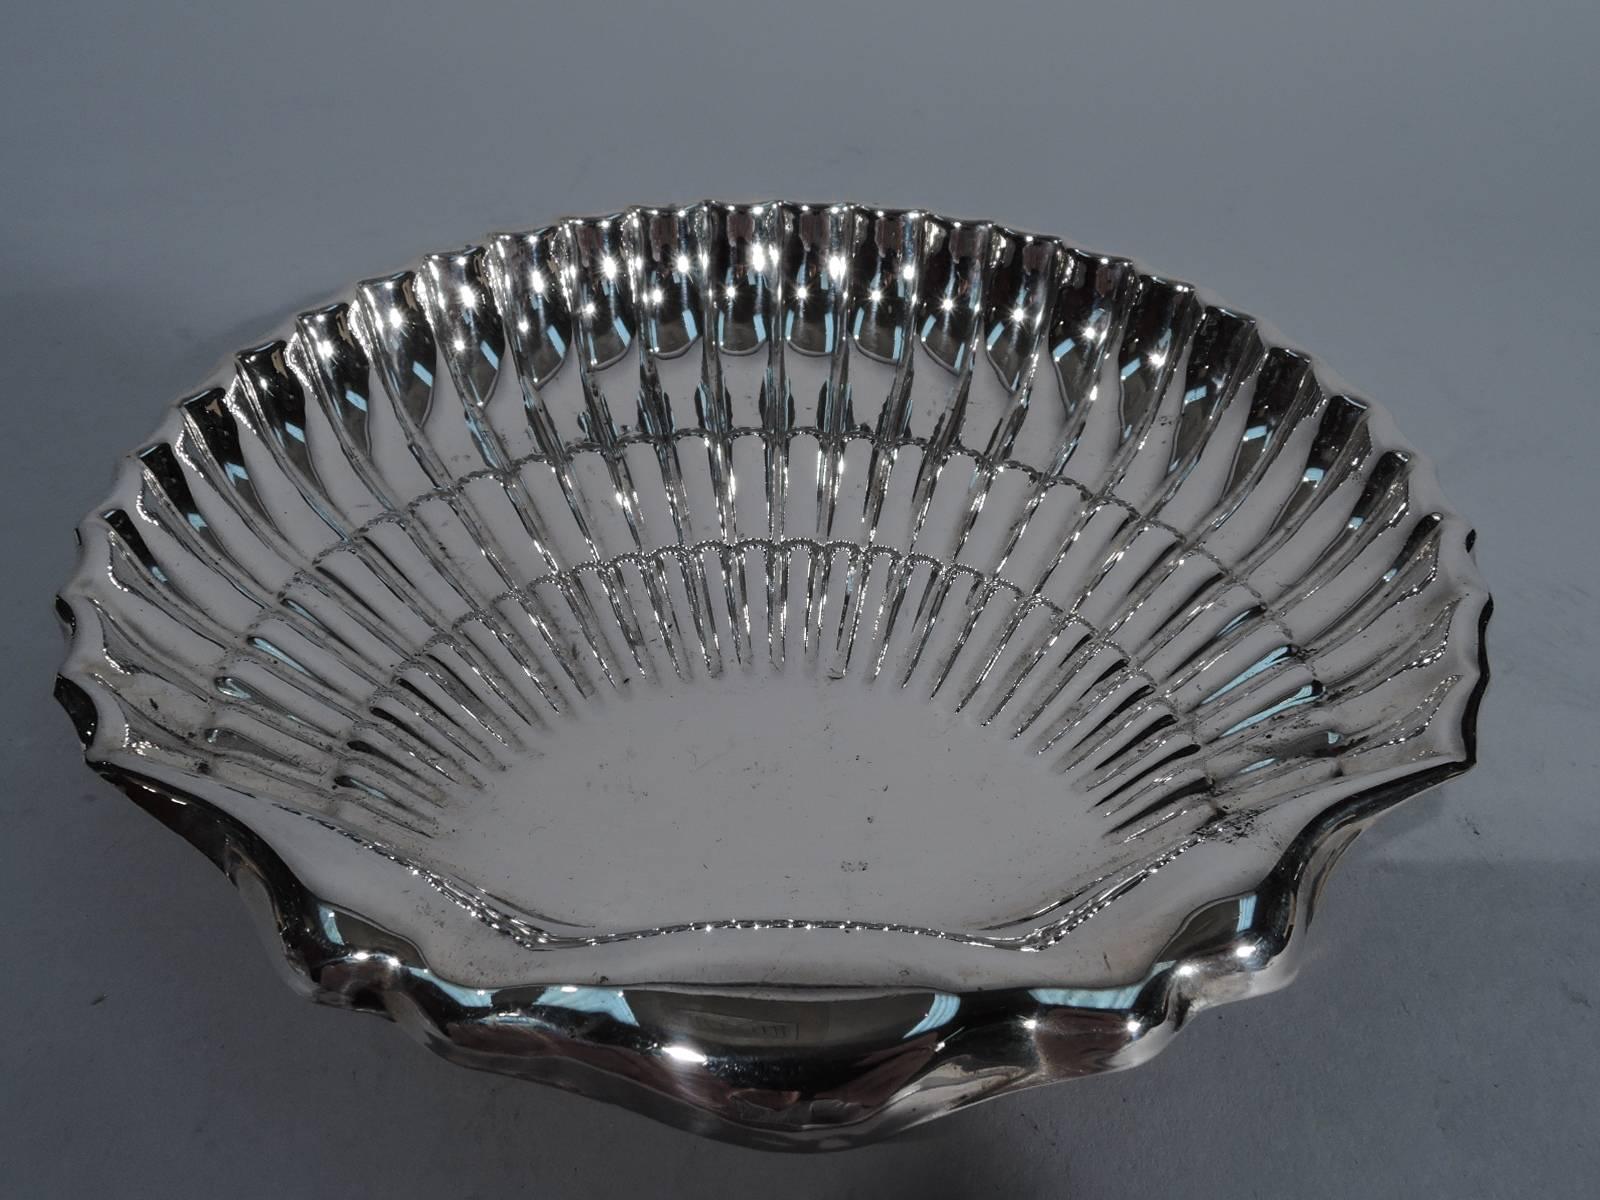 Sterling silver scallop shell. Made by Fisher in New York. Straight and tiered flutes, scrolled rim and two ball supports. Hallmark includes no. 142. Very good condition.

Dimensions: H 1 x W 6 1/4 x D 6 3/8 in. Weight: 4.0 troy ounces. BM626.